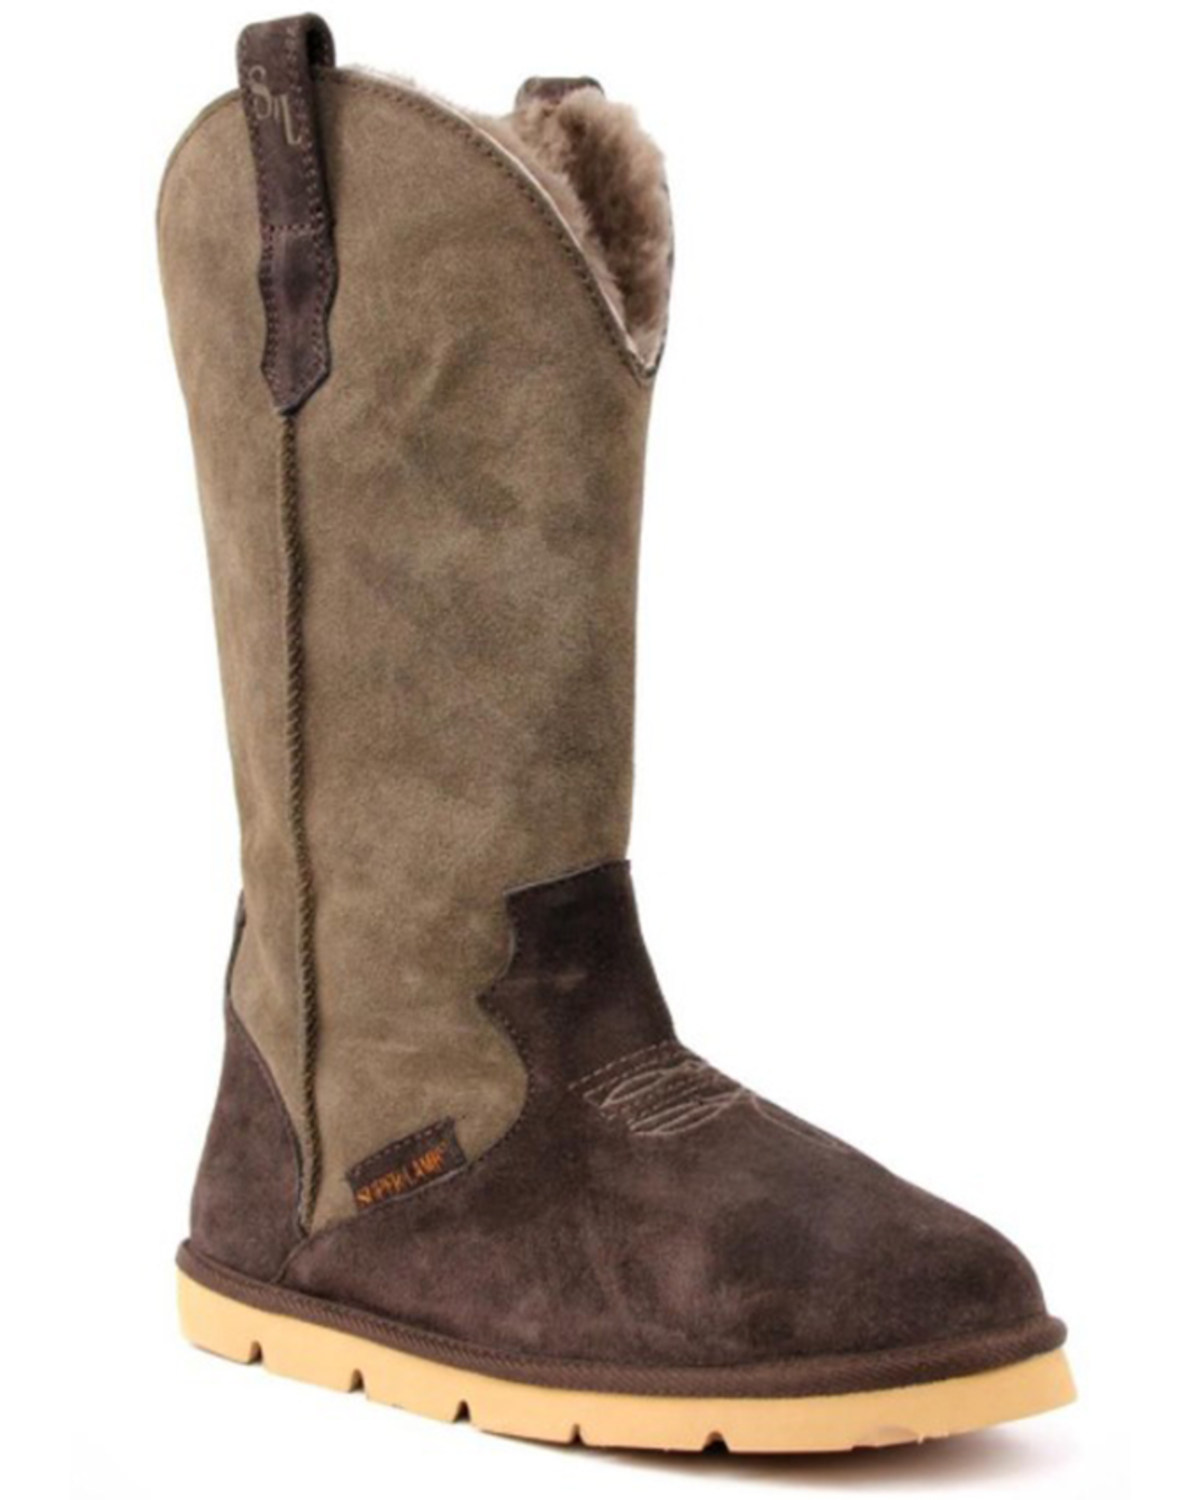 Superlamb Women's Cowboy All Suede Leather Pull On Casual Boot